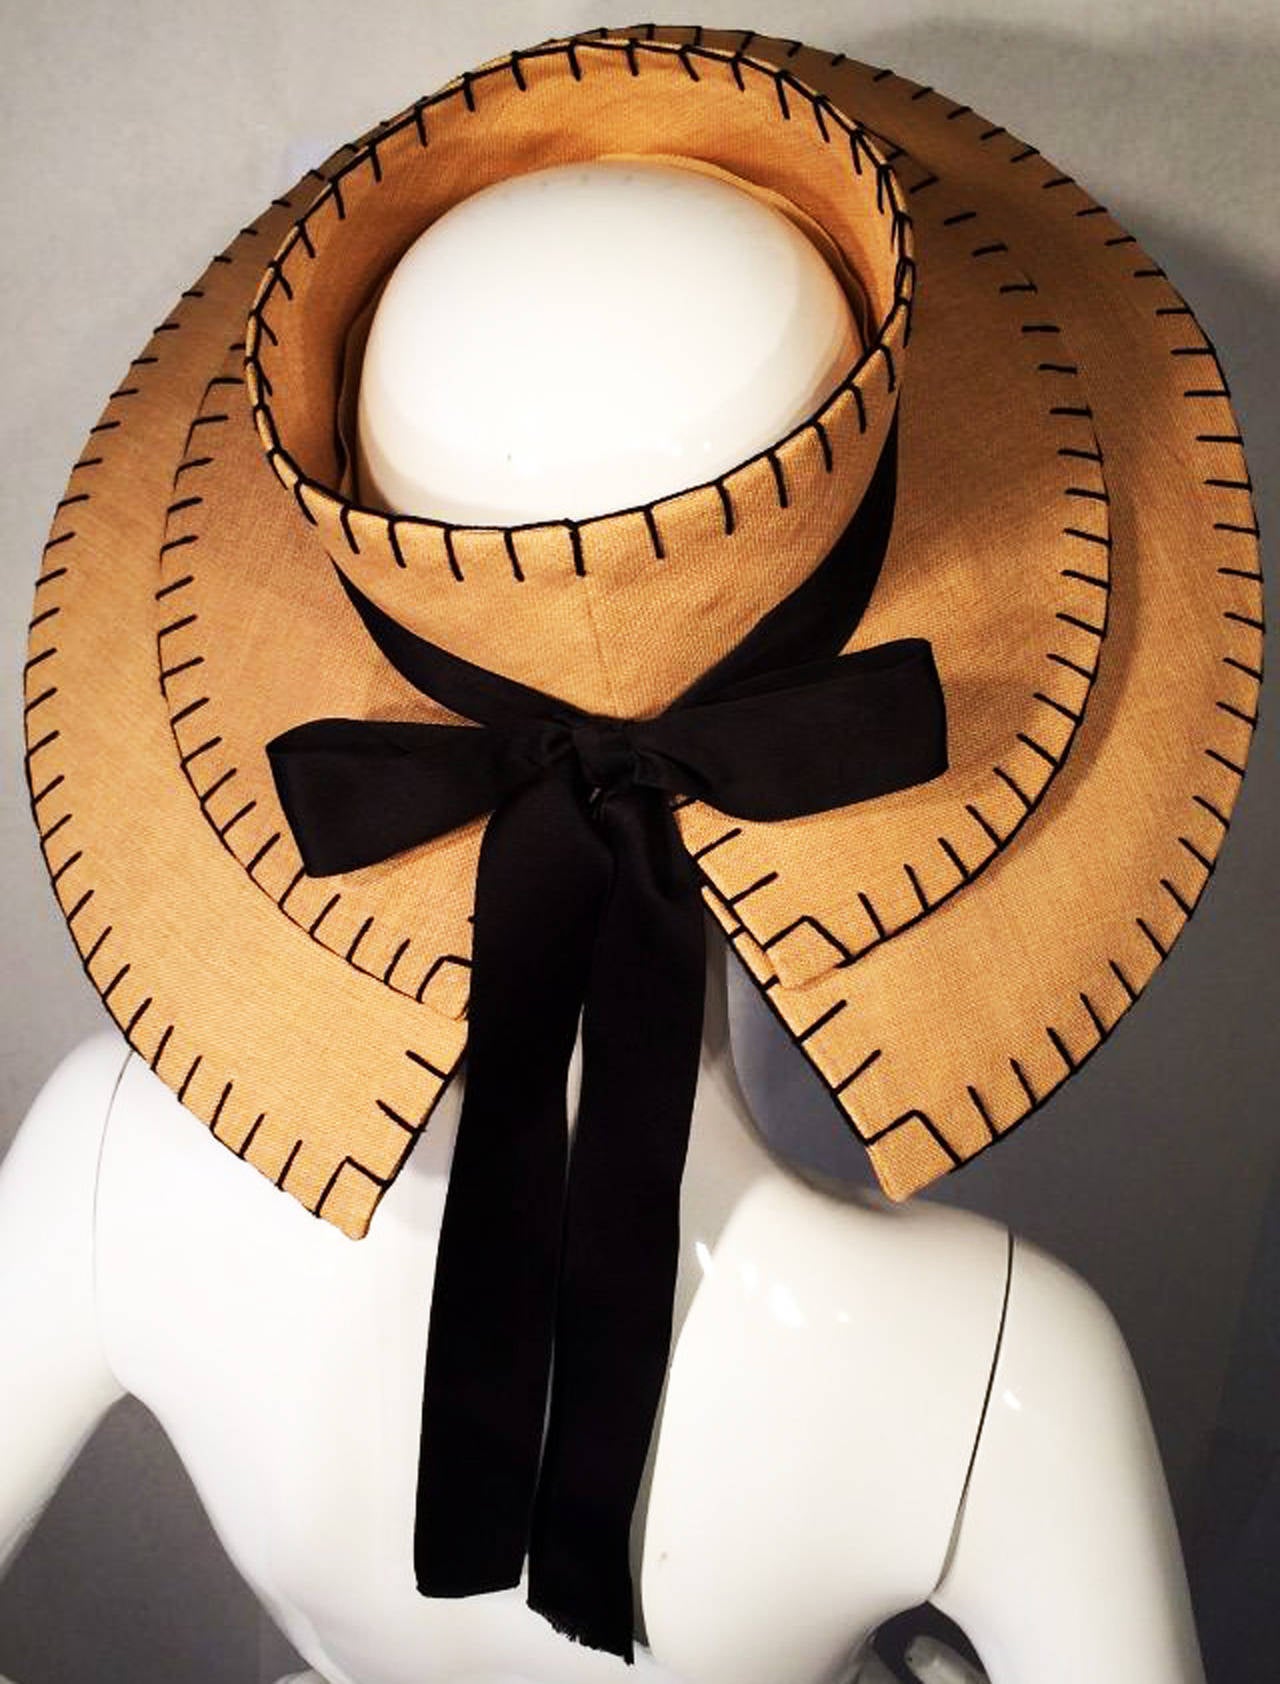 A fine and rare vintage Chanel haute couture hat. Authentic item custom ordered directly from Chanel 1990 haute couture location at 31 rue Cambon, Paris via Maison Michel Paris Milliners. Finest grade woven straw item features a open crown and